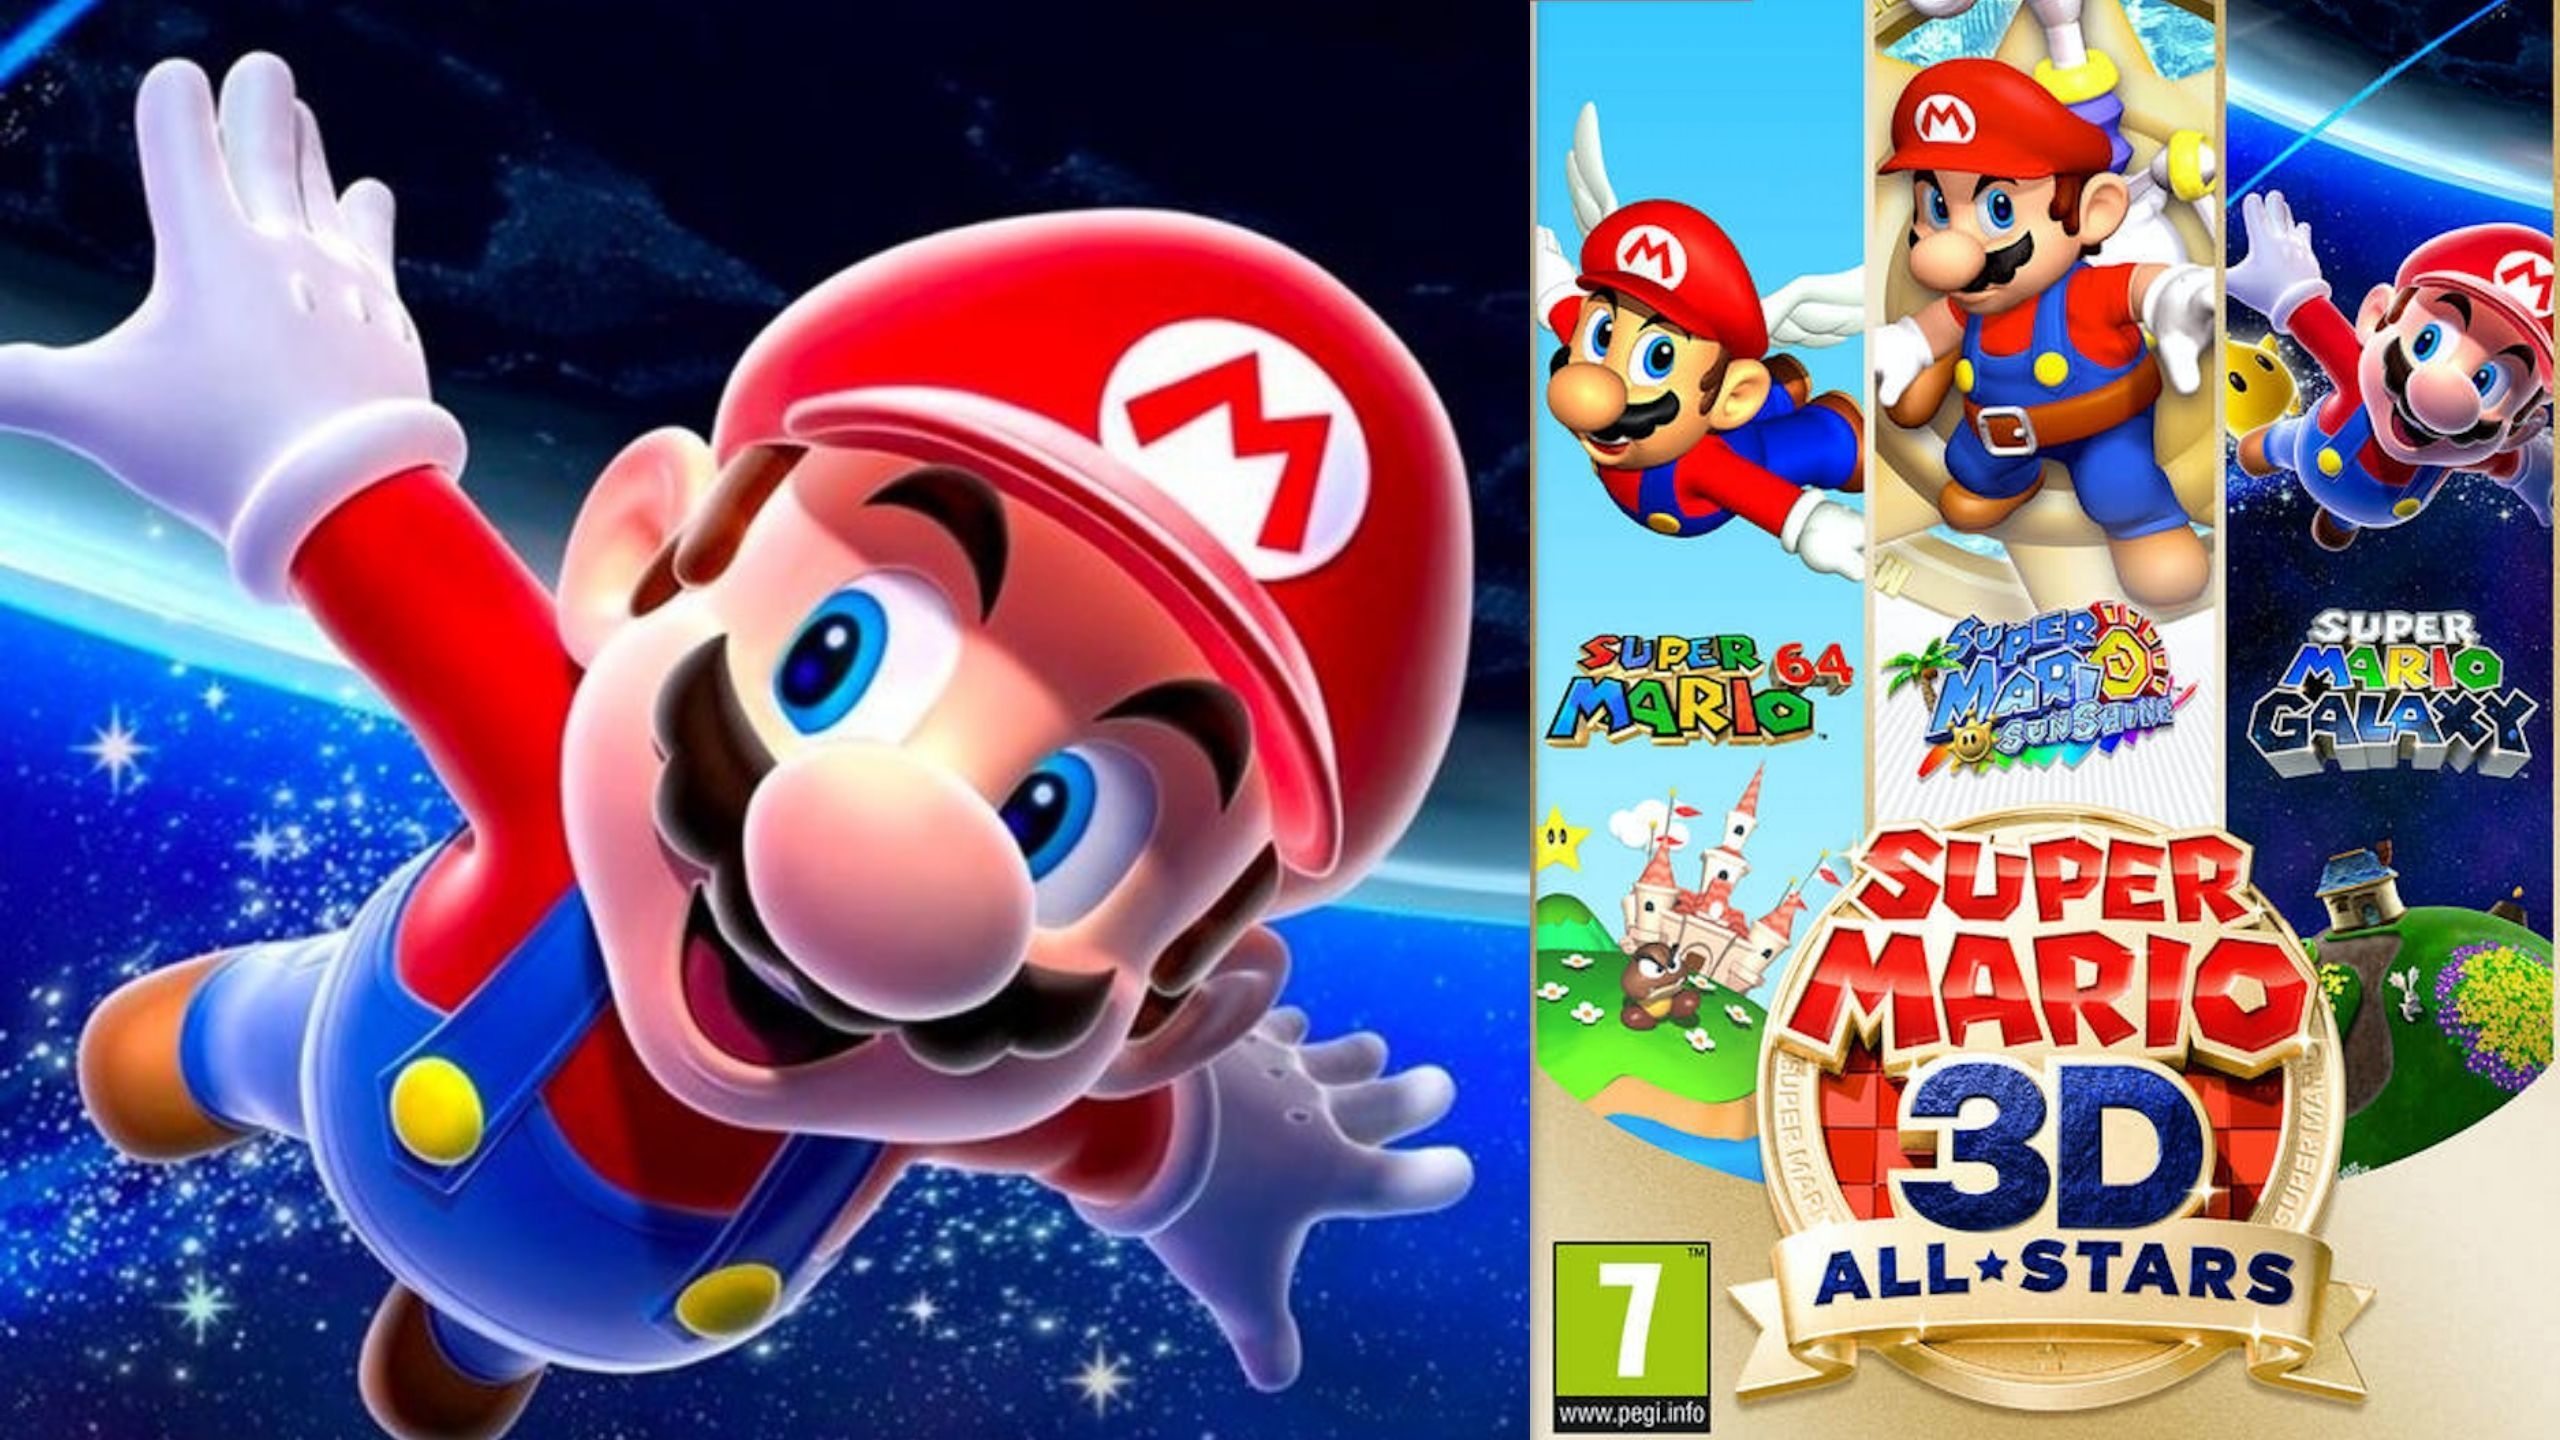 Daily Deals: Save Money When You Pre Order Super Mario 3D All Stars